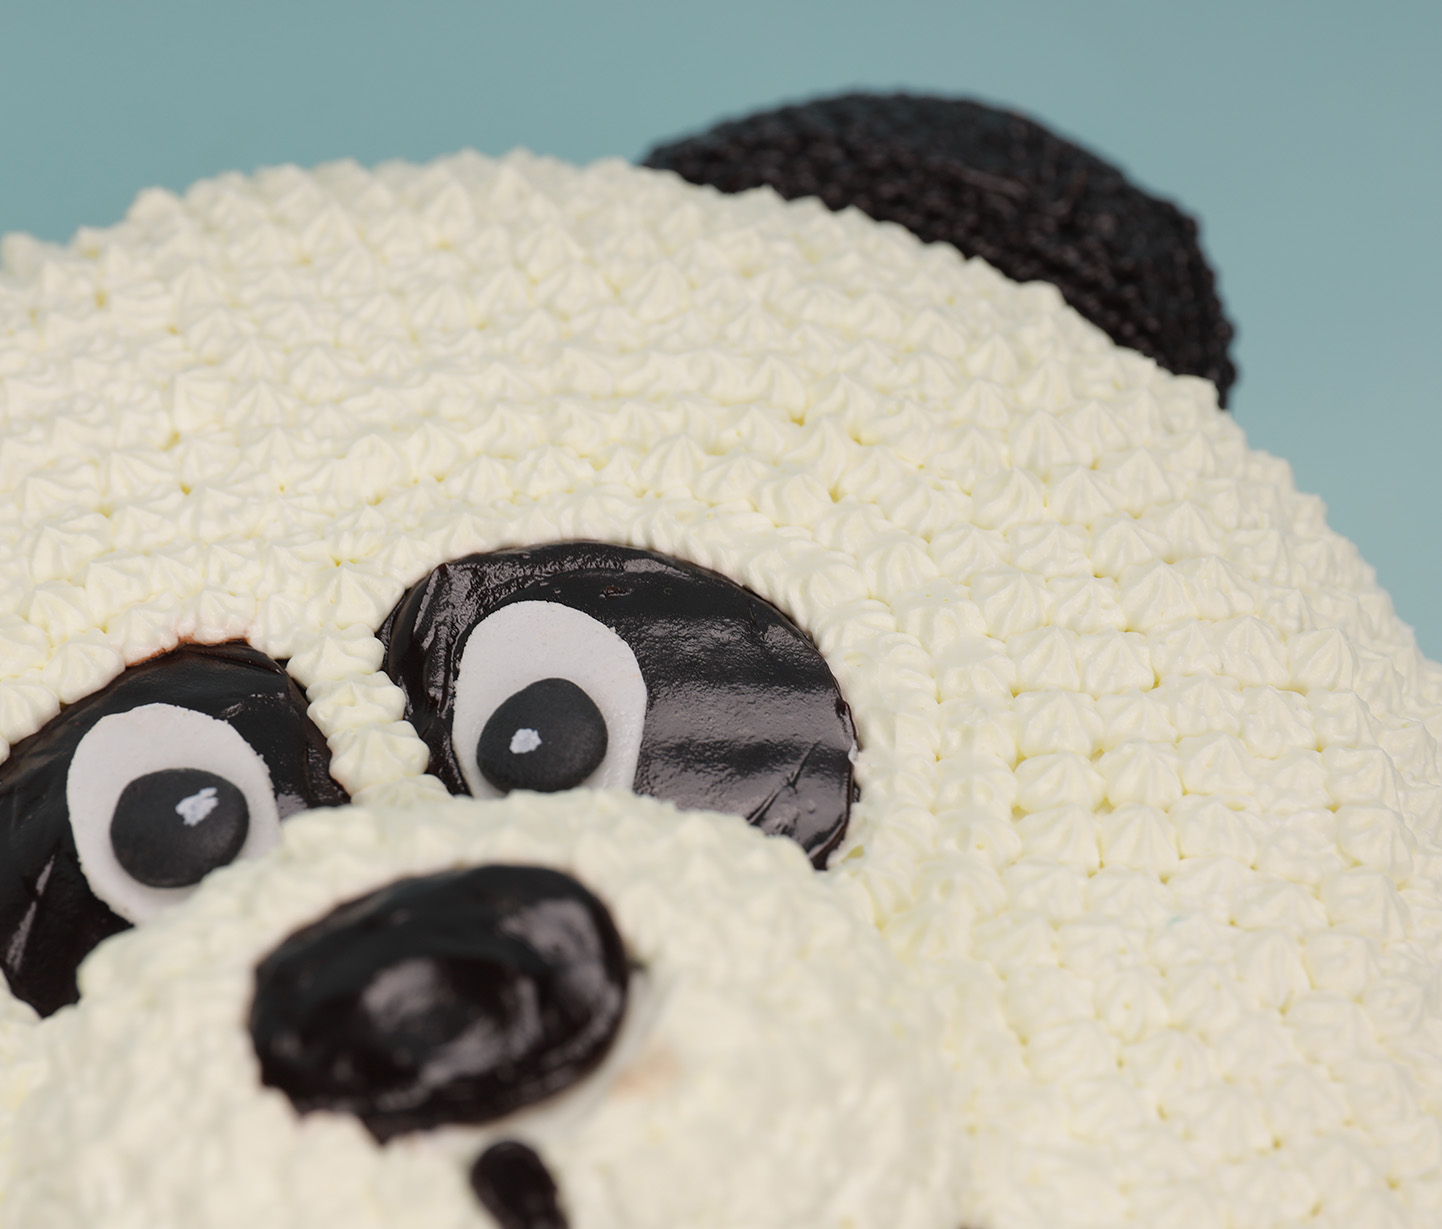 3D Panda Cake - Decorated Cake by Unique Cake's Boutique - CakesDecor